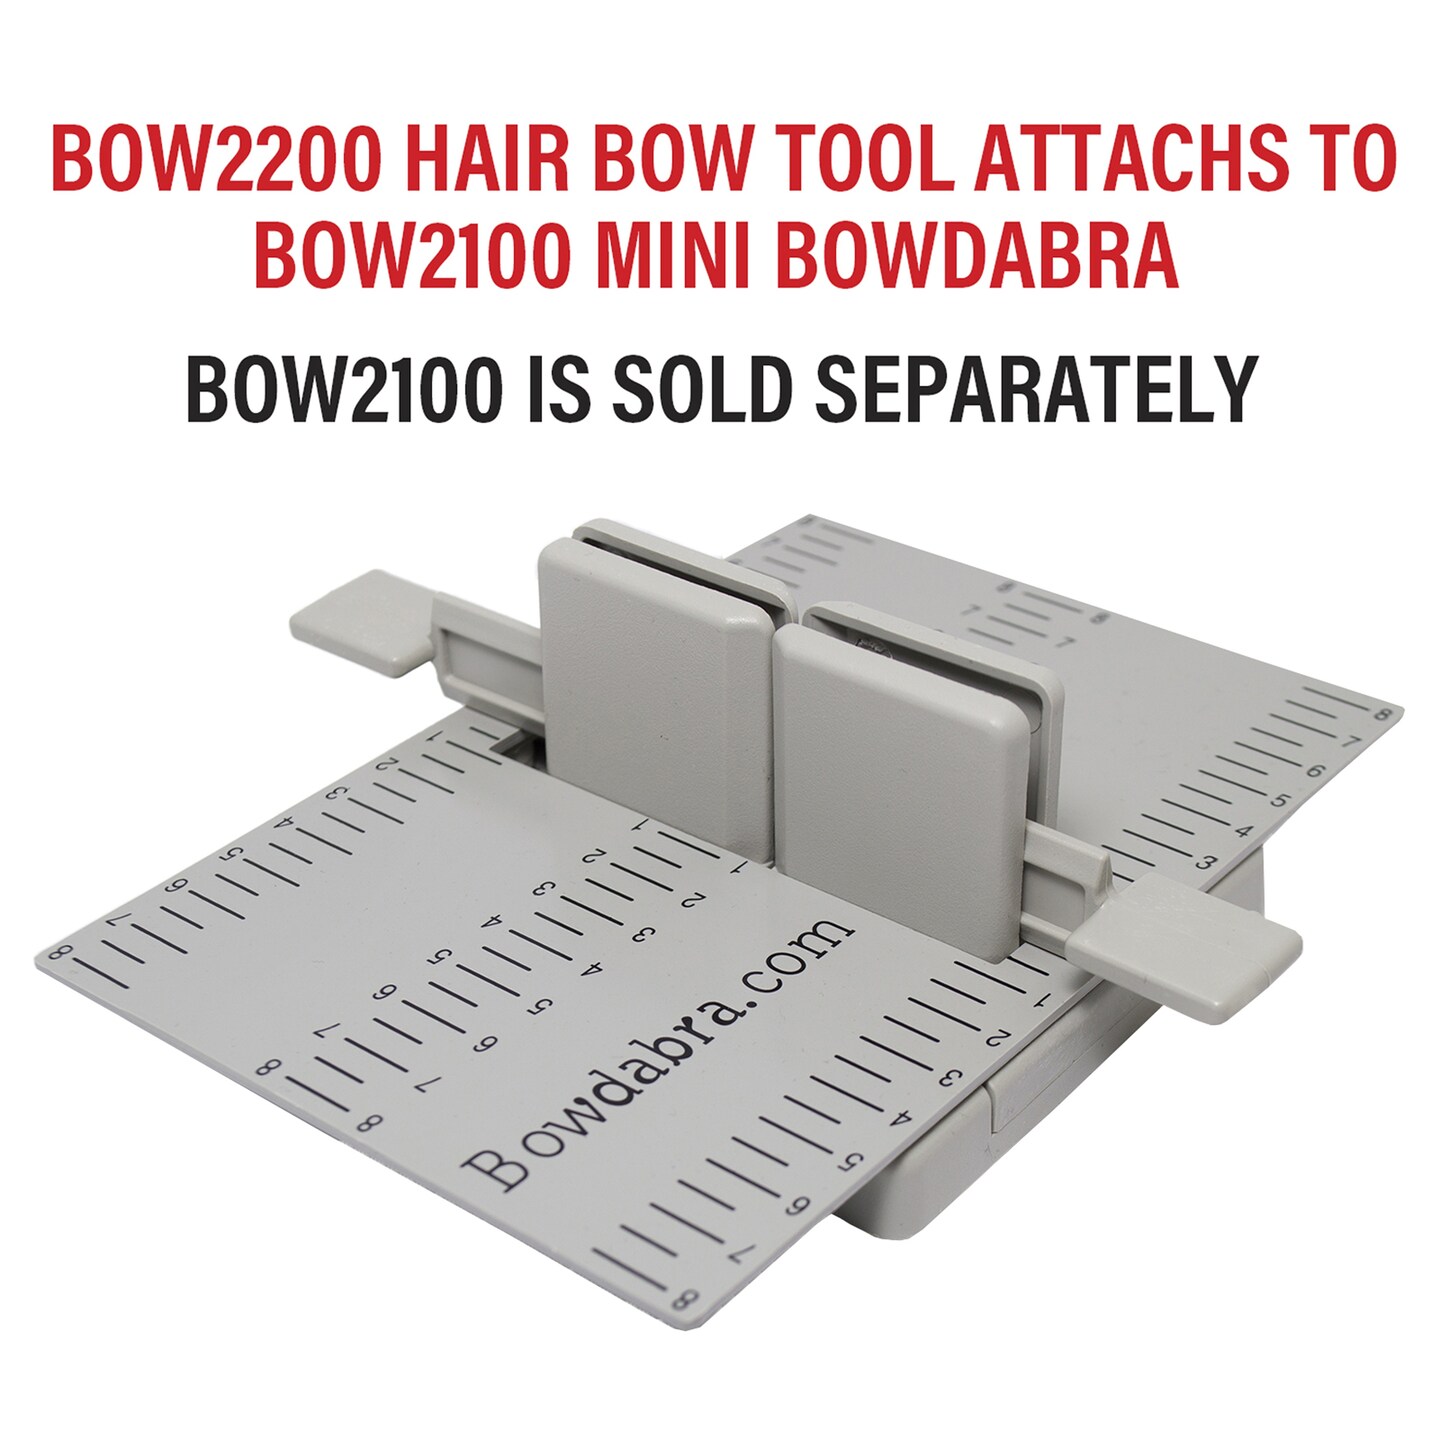 Mini Bowdabra Bowmaker - How to make perfect bows, every single